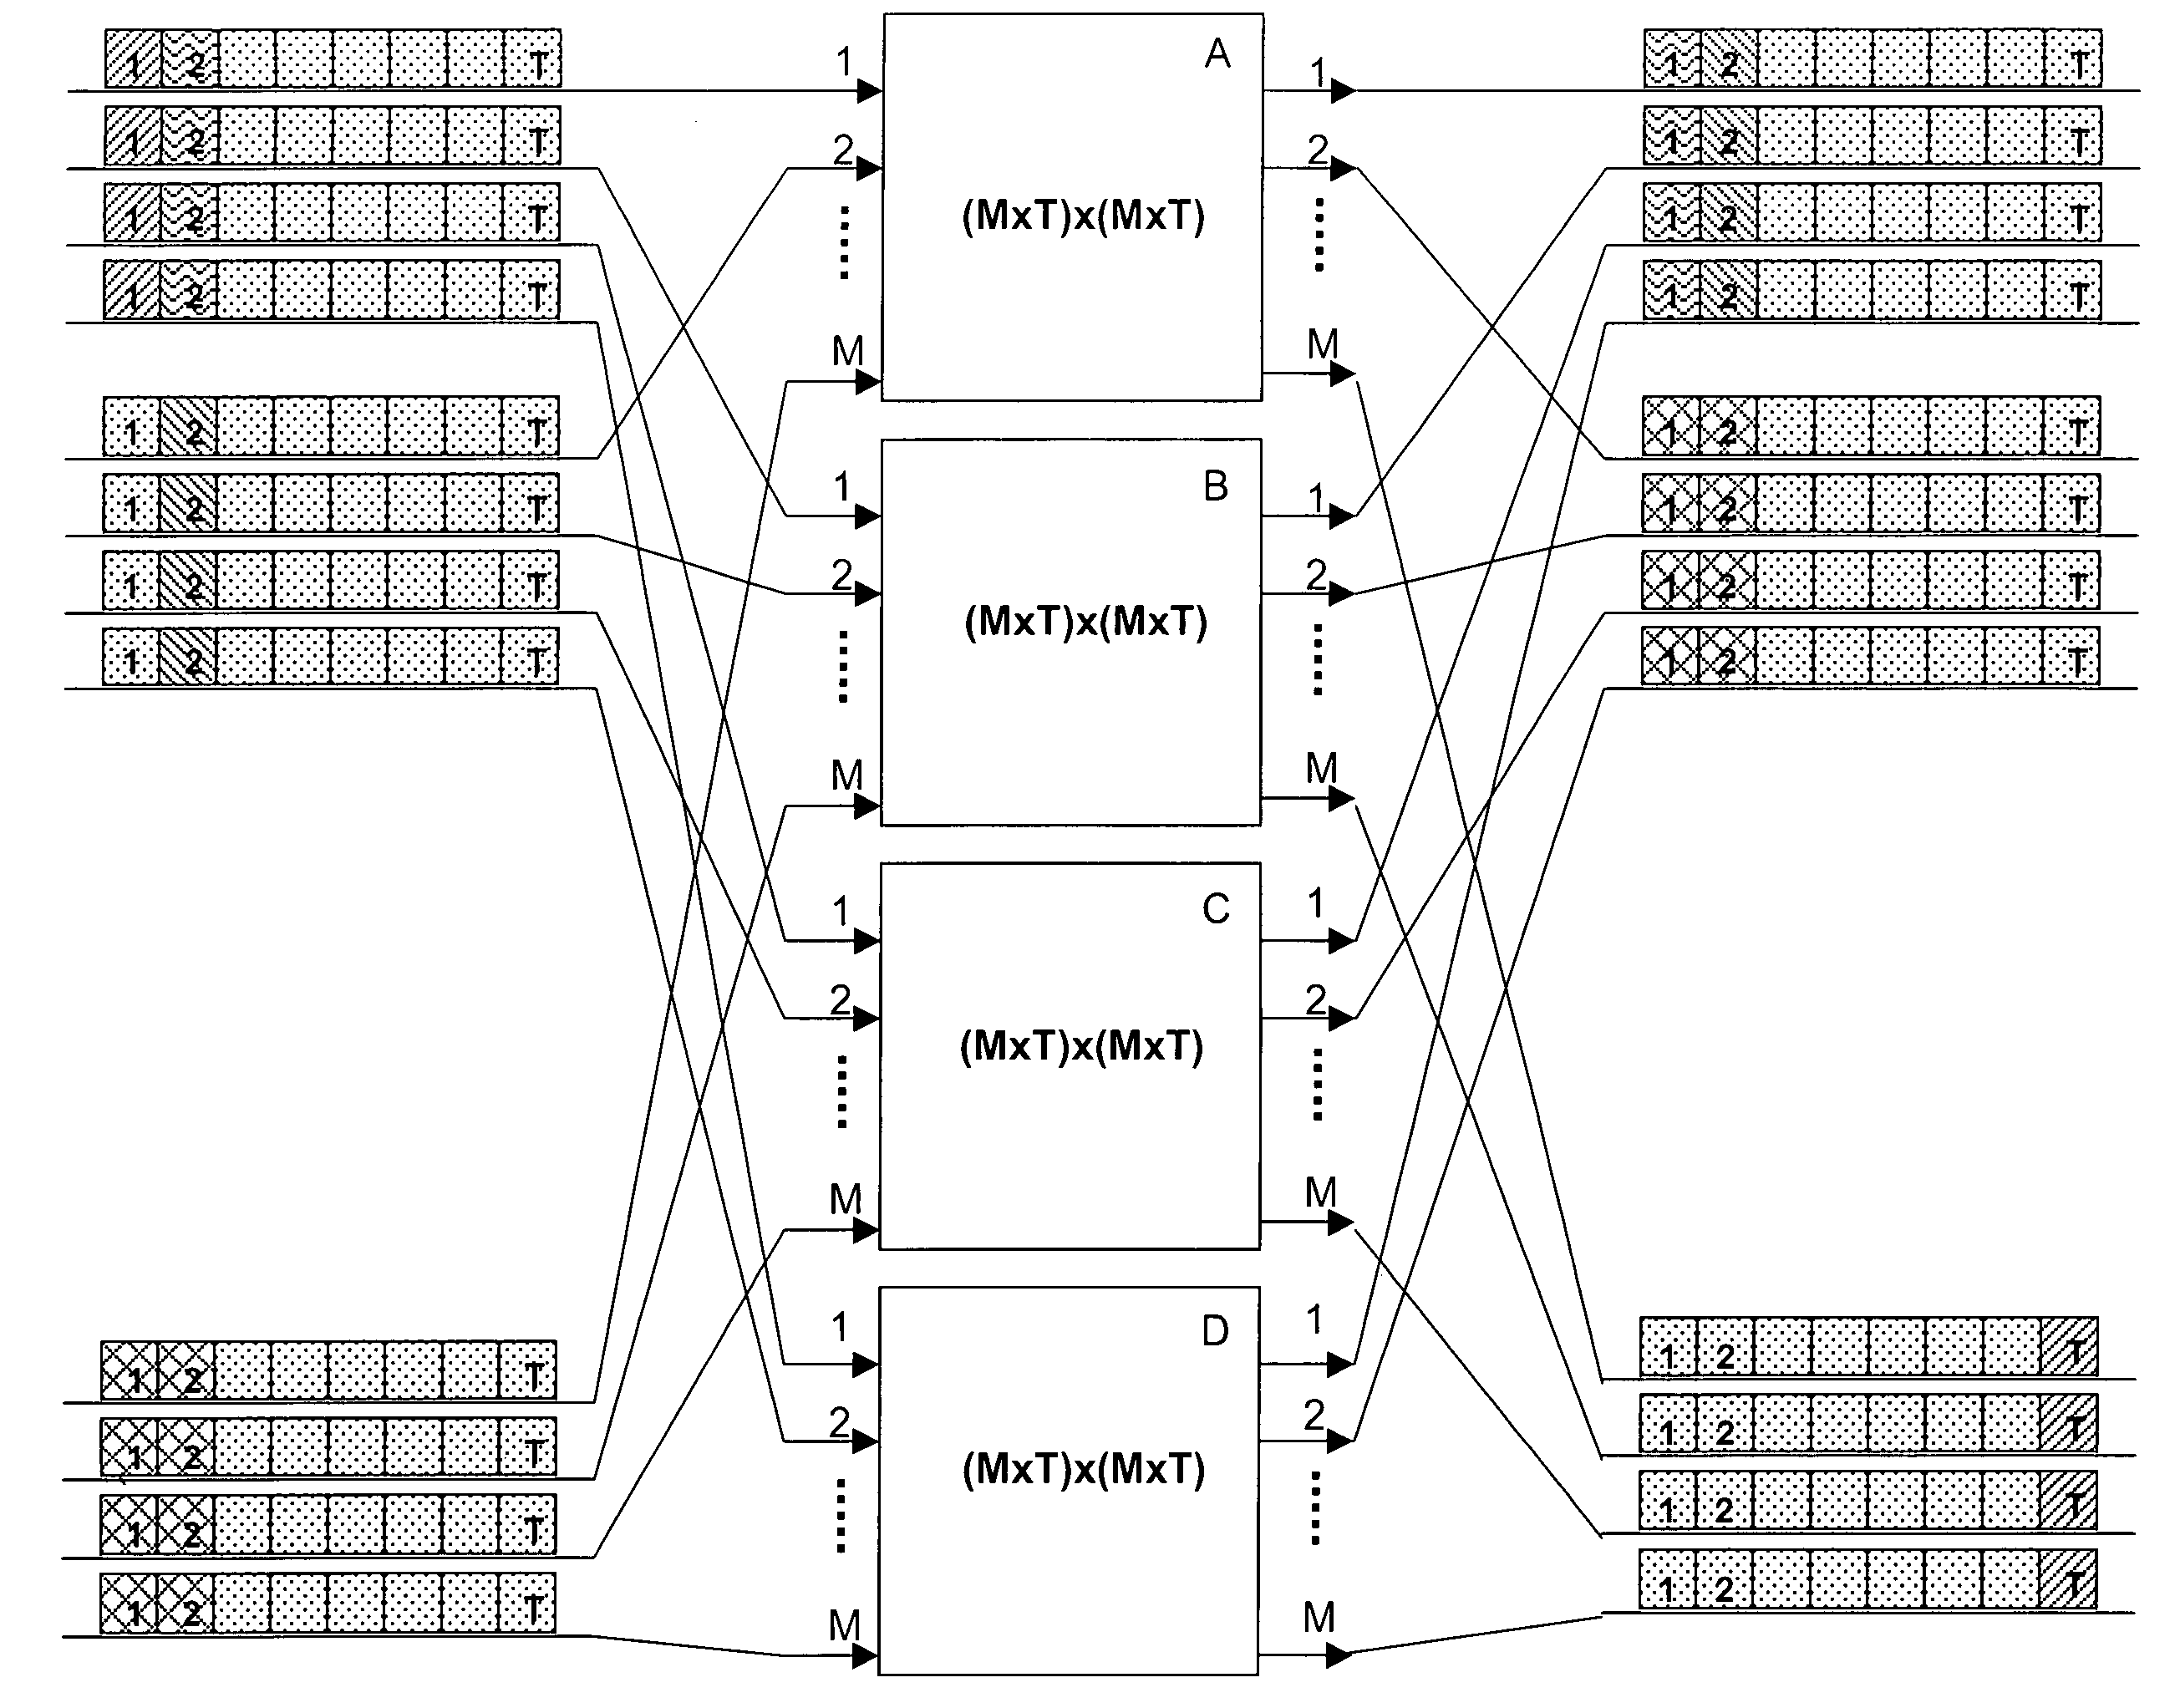 Time division multiplexed link connections between a switching matrix and a port in a network element